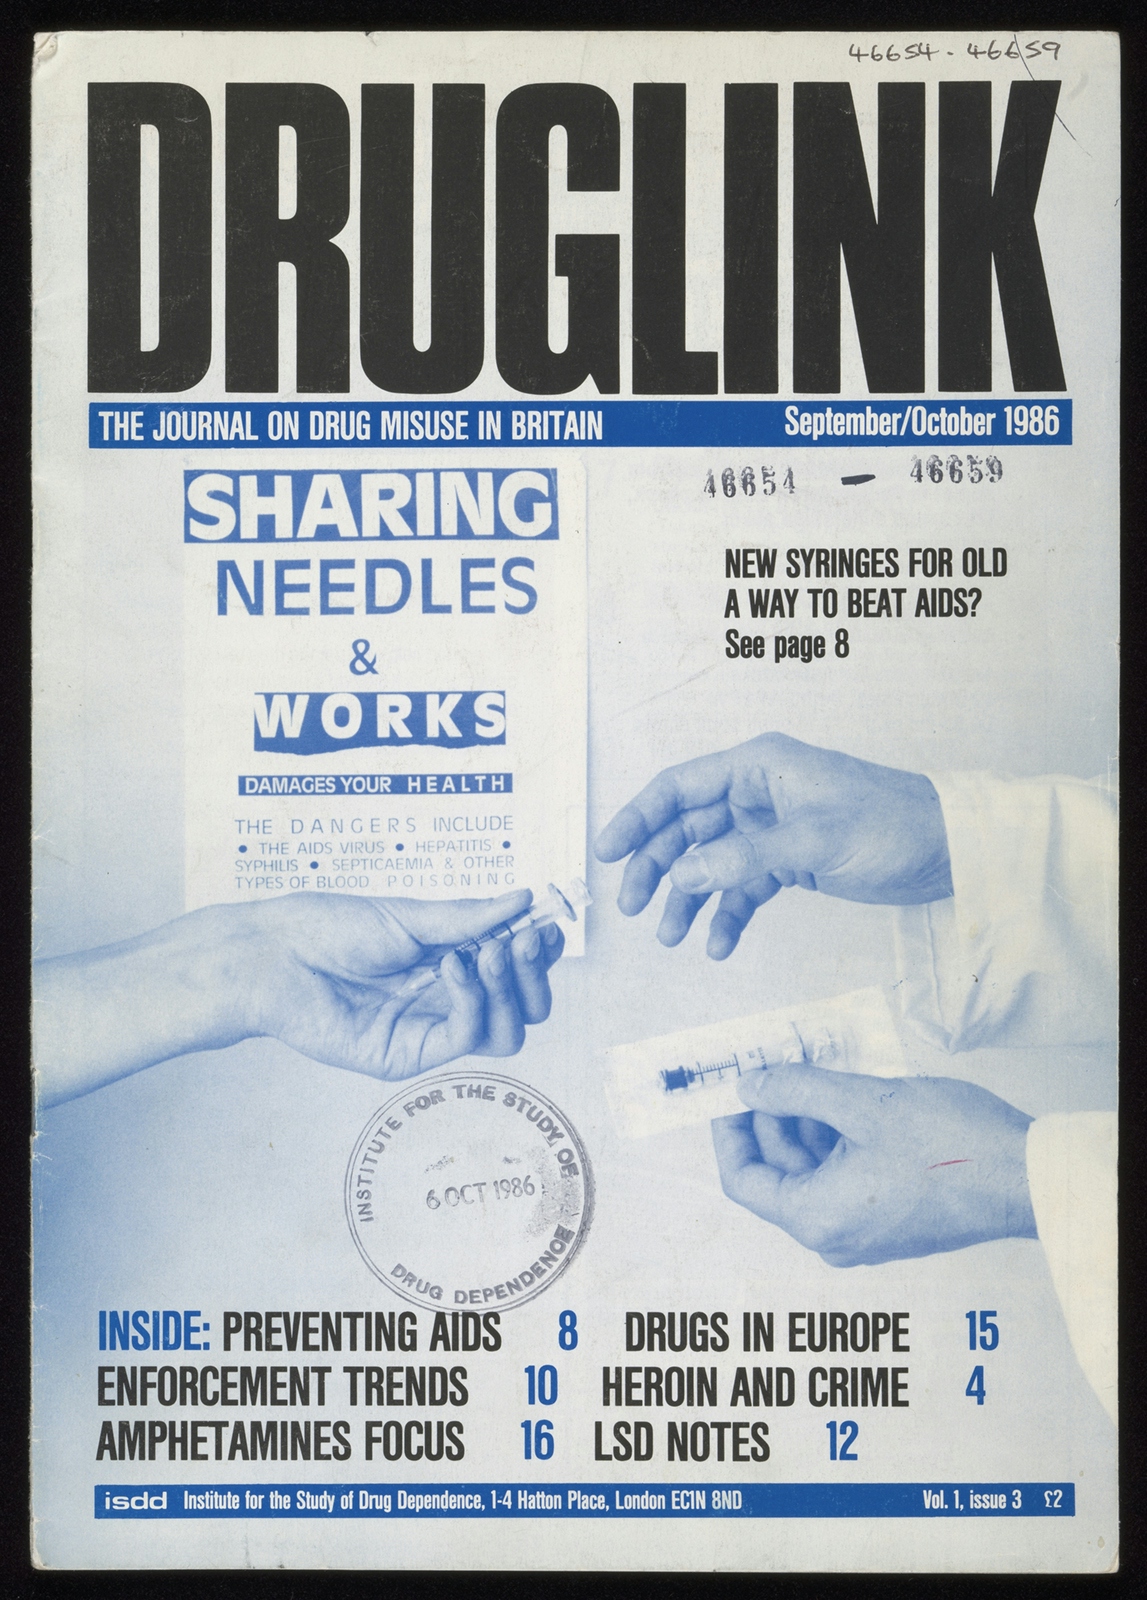 Front cover of a magazine, with black, blue and white text, and a blue-washed image of a person handing a syringe to someone wearing a white coat.